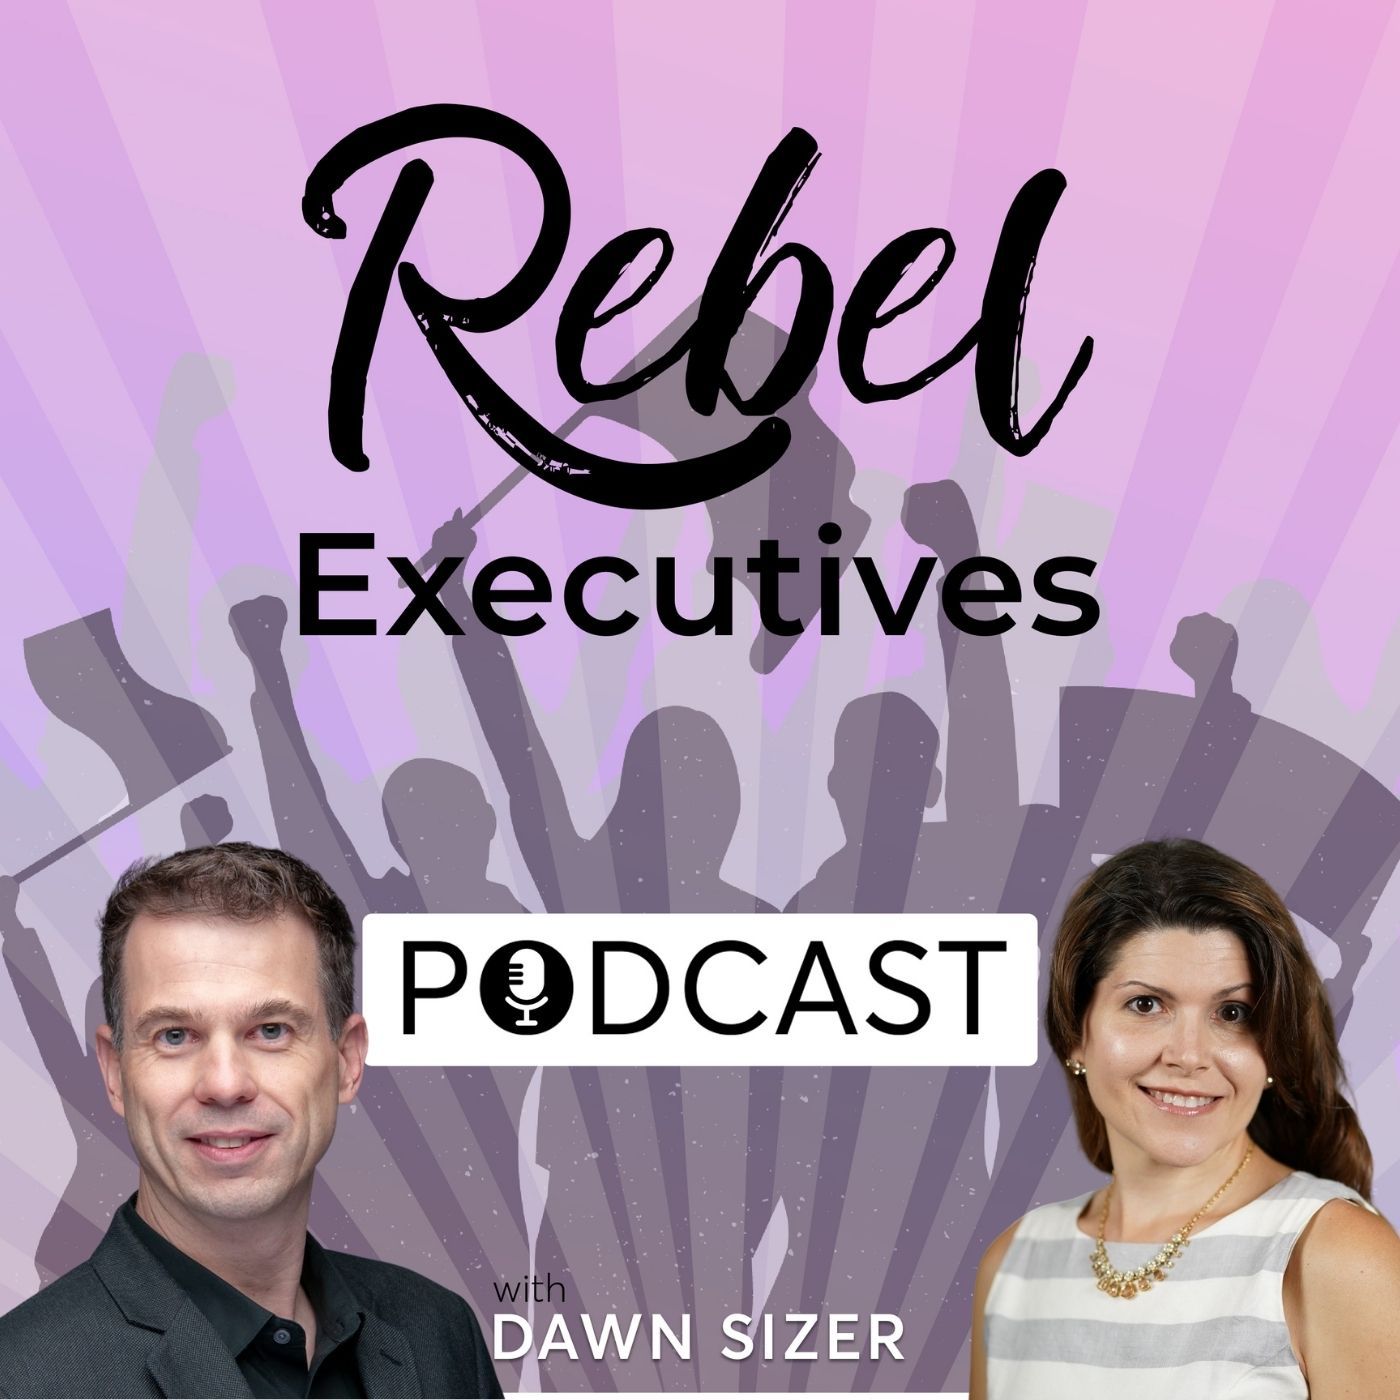 Episode 7: Running a Business with your Spouse & Staying Married - David Sizer